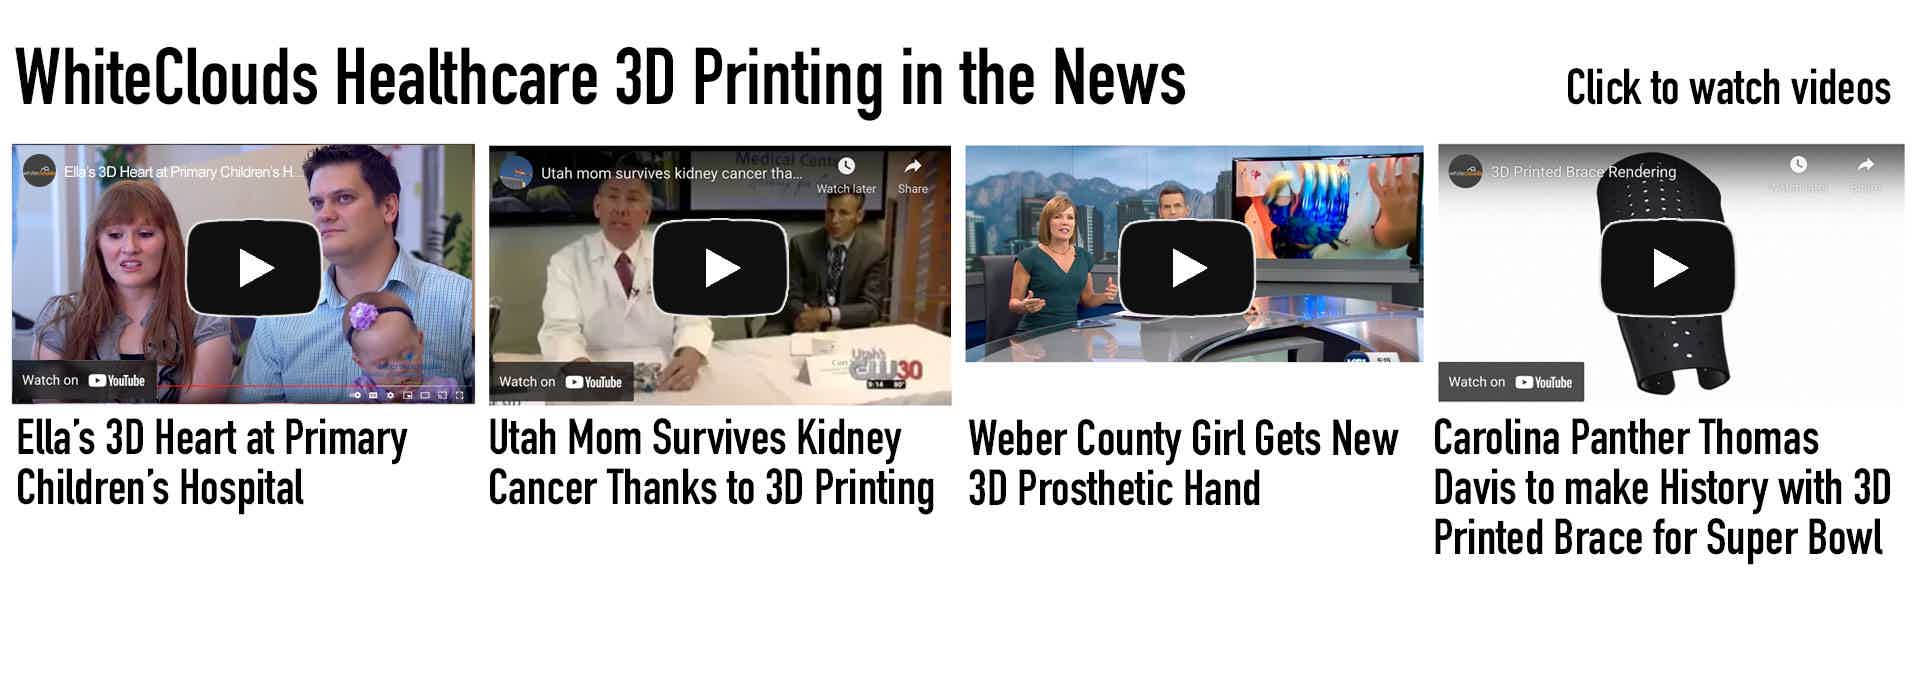 WhiteClouds Healthcare 3D Printing in the News